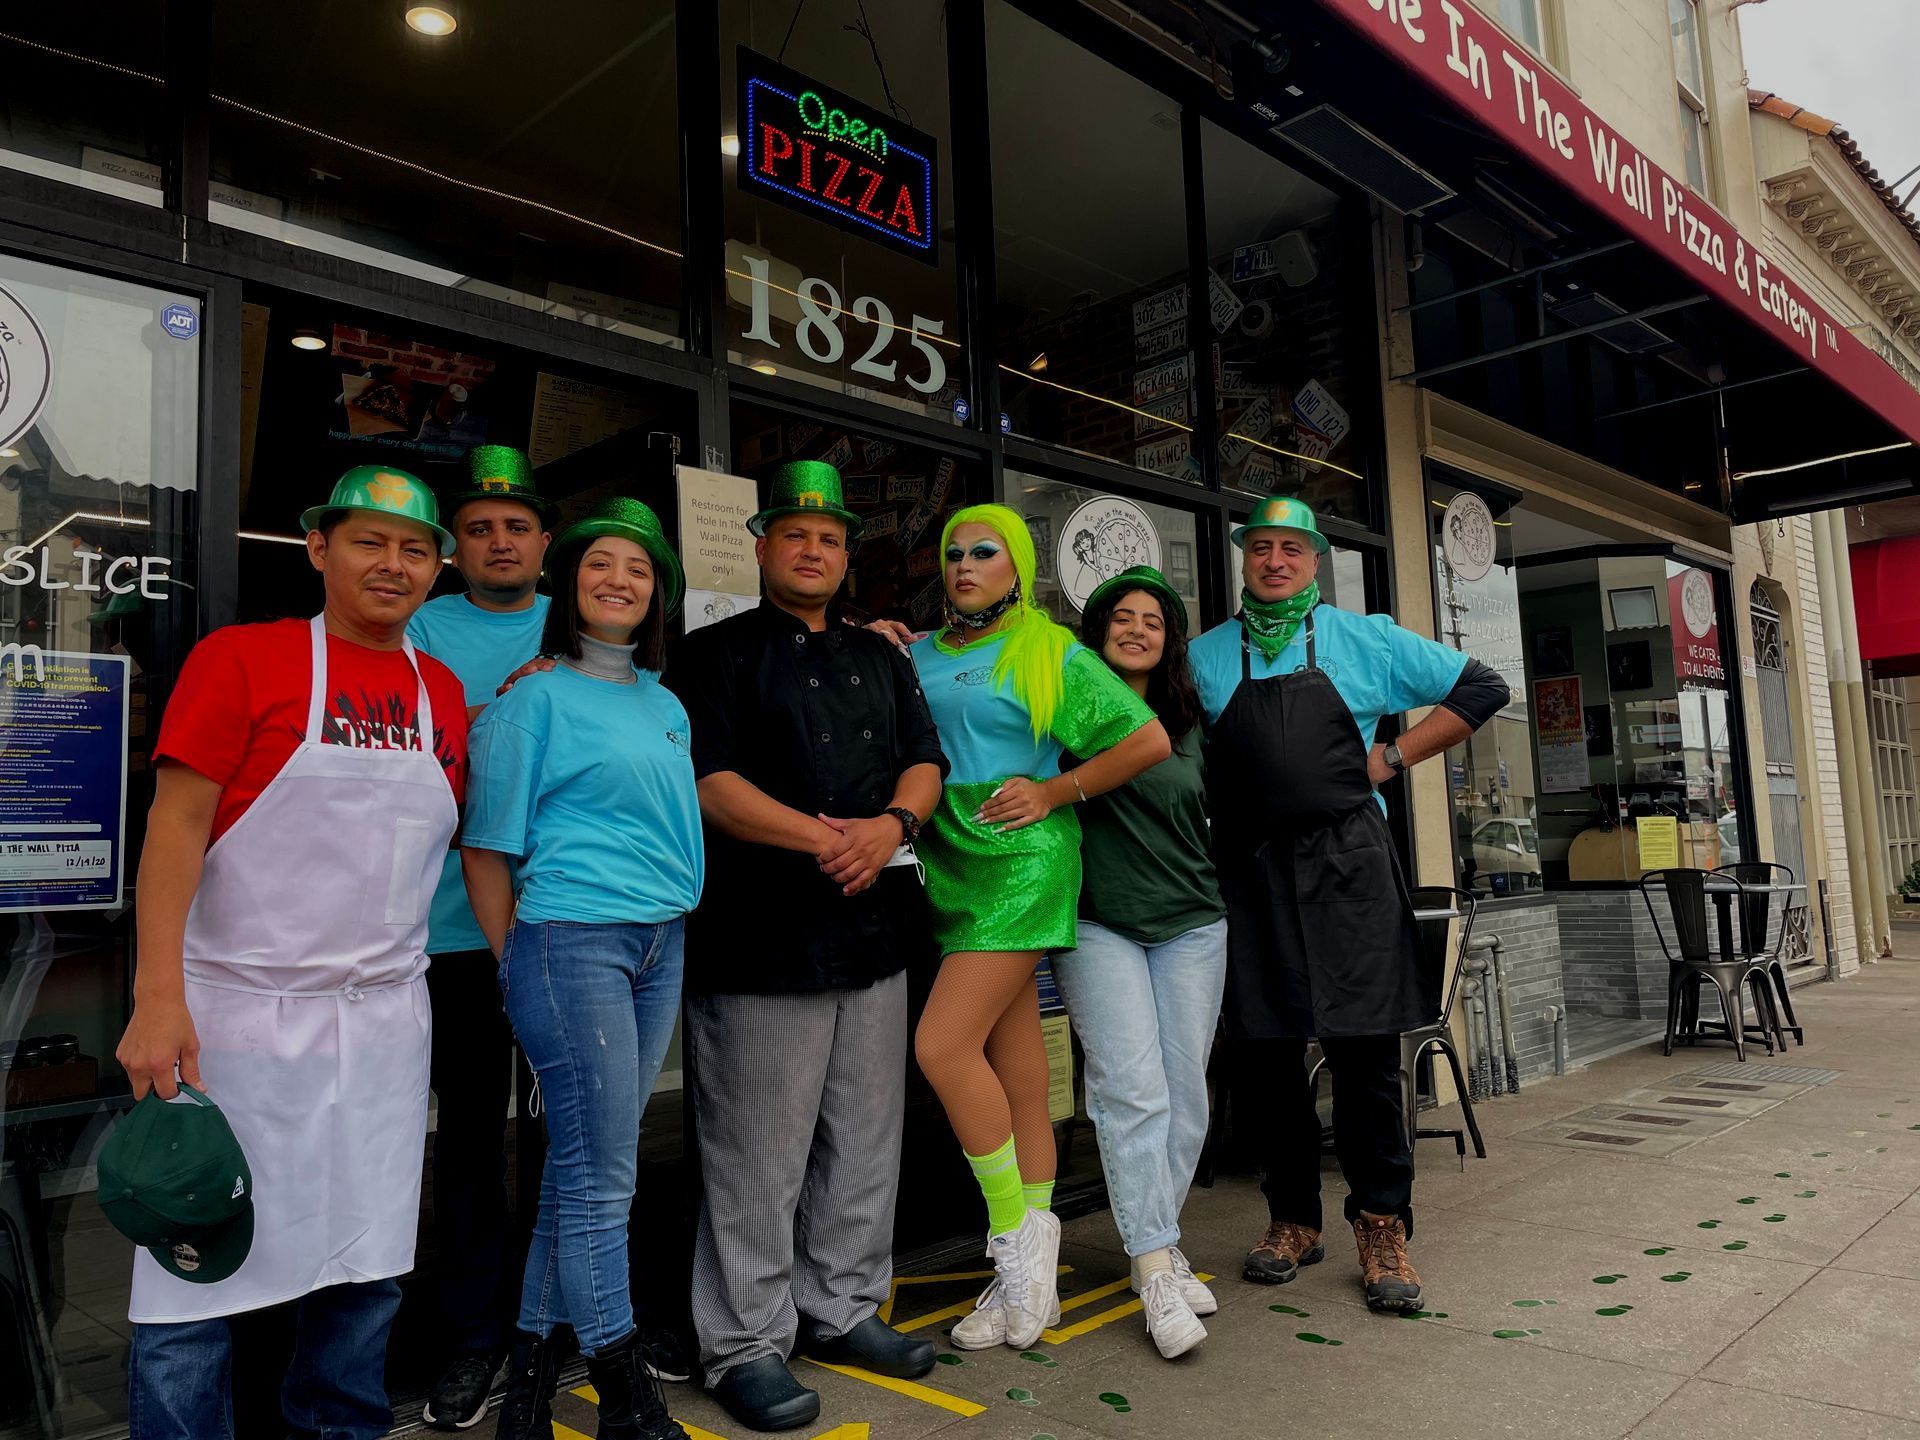 A group of people are posing for a picture in front of a pizza restaurant.